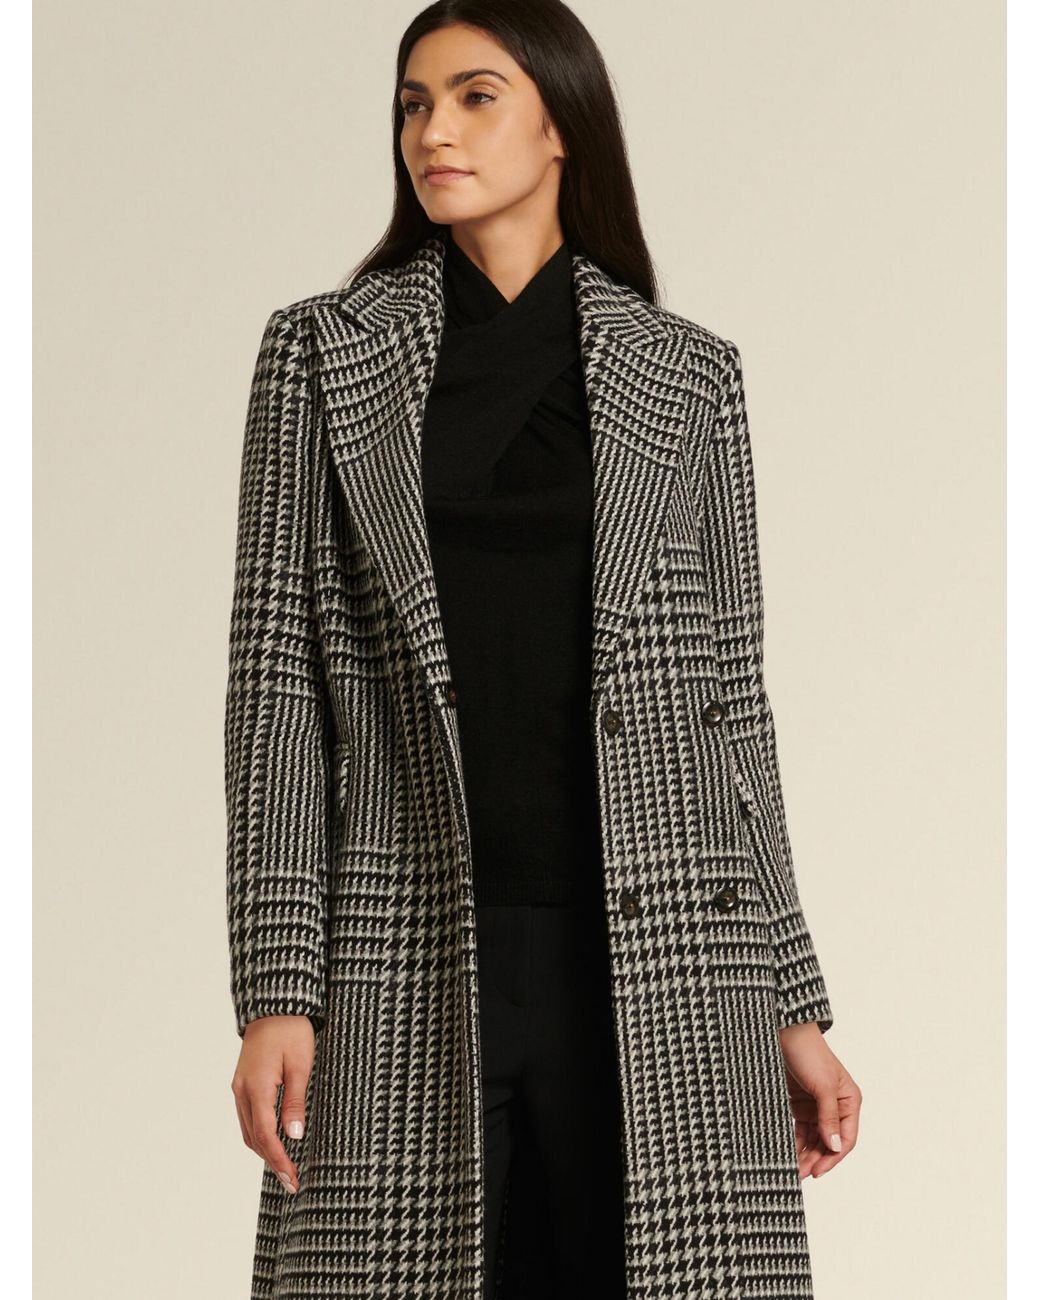 DKNY Synthetic Donna Karan Double-breasted Glen Plaid Coat in  Black/White/Grey (Black) - Lyst